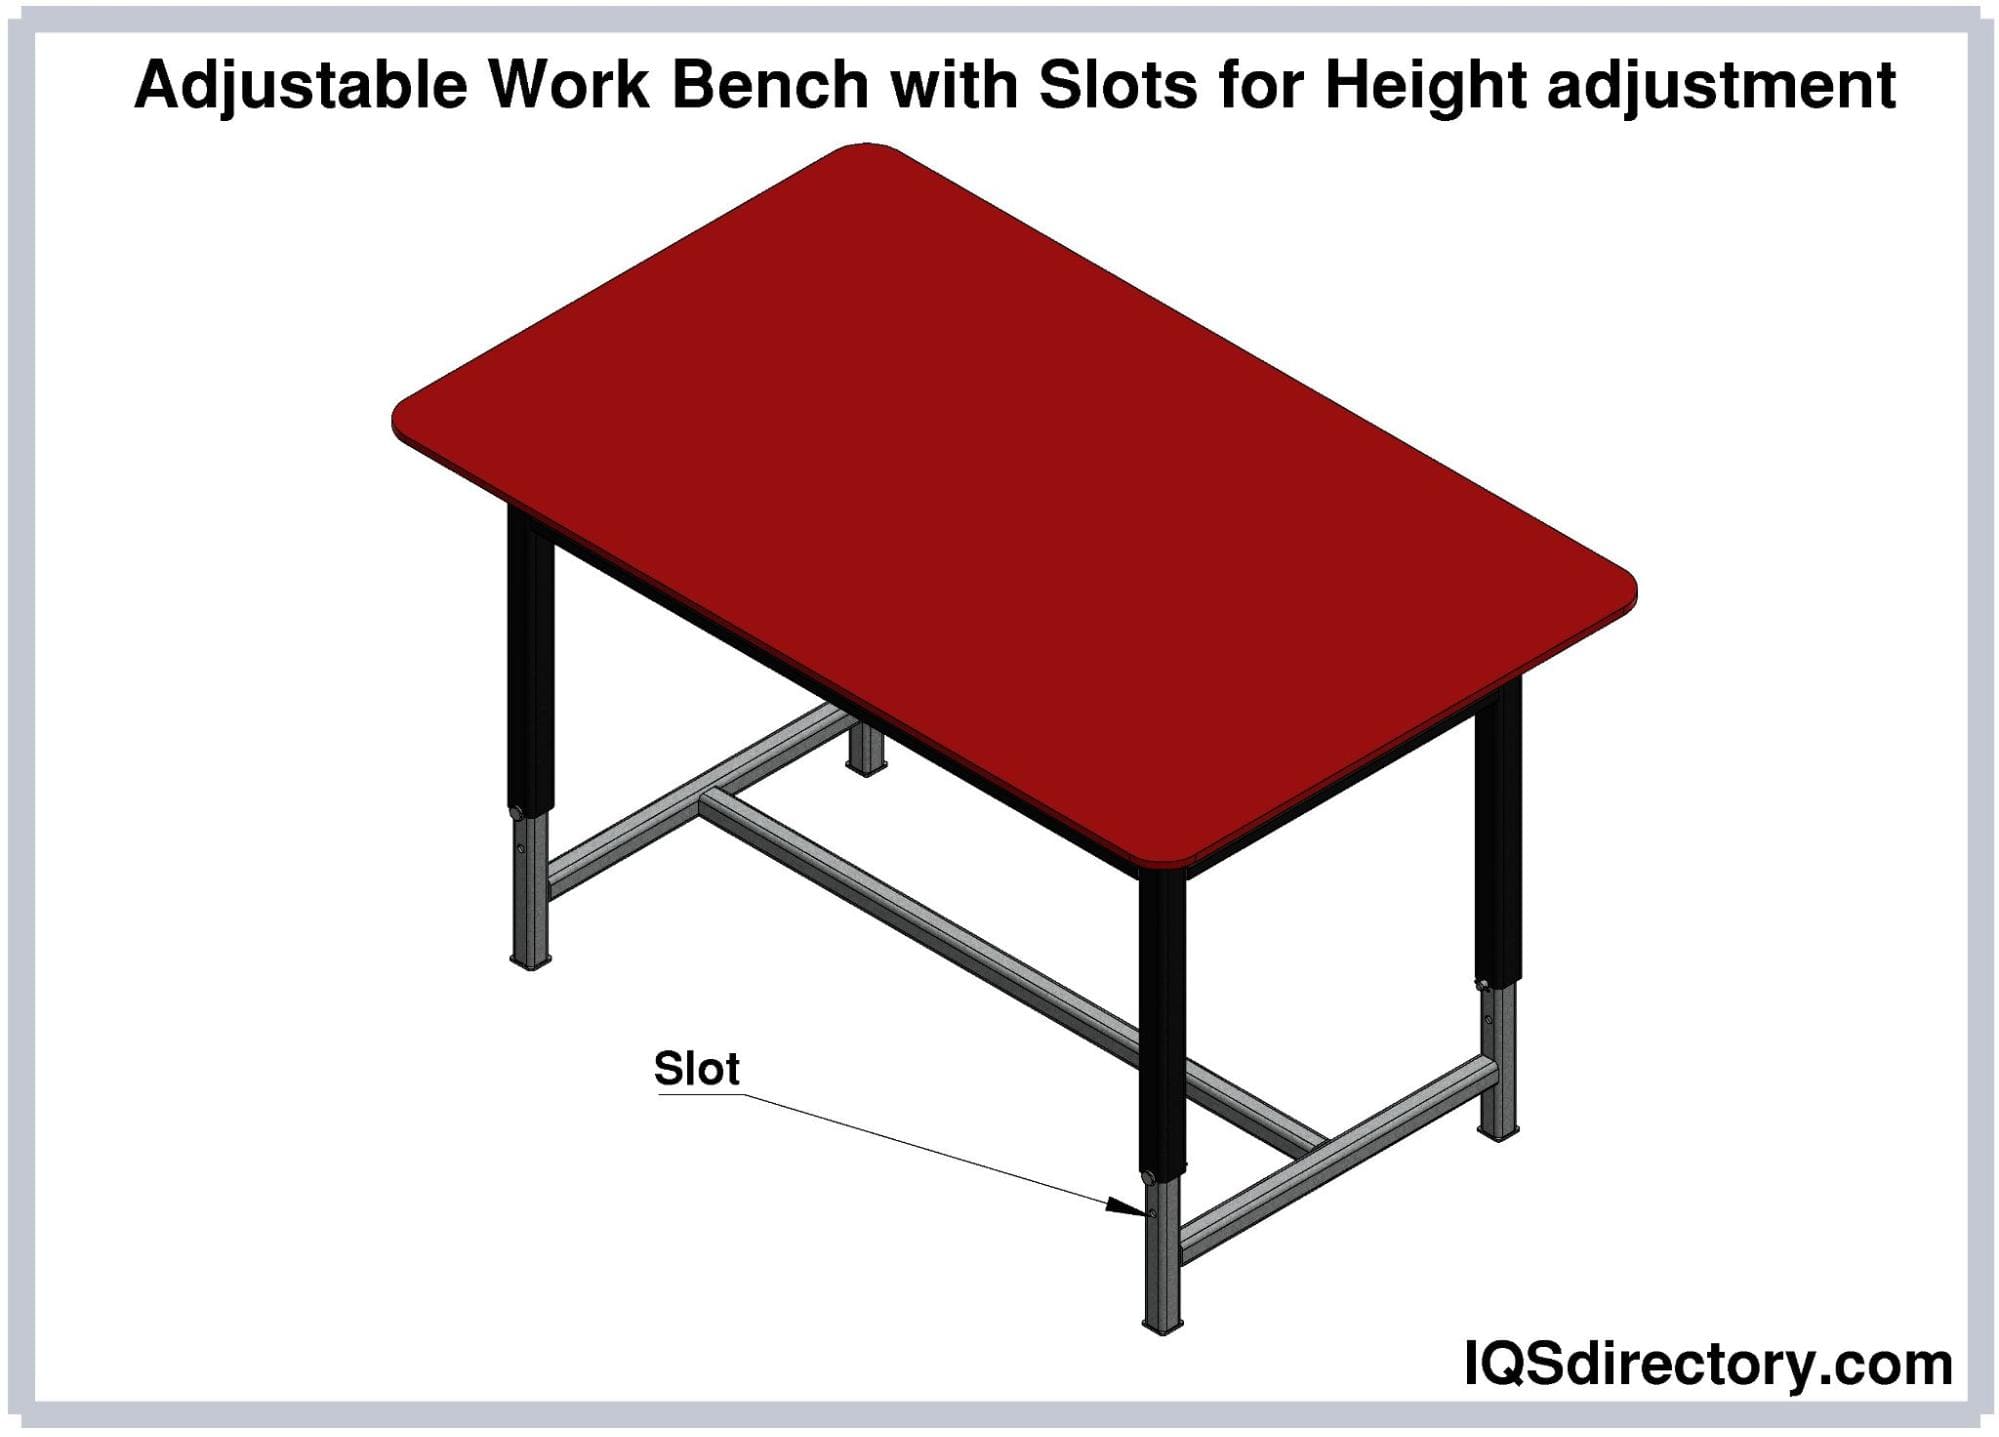 Adjustable Workbench: Types, Uses, Features and Benefits